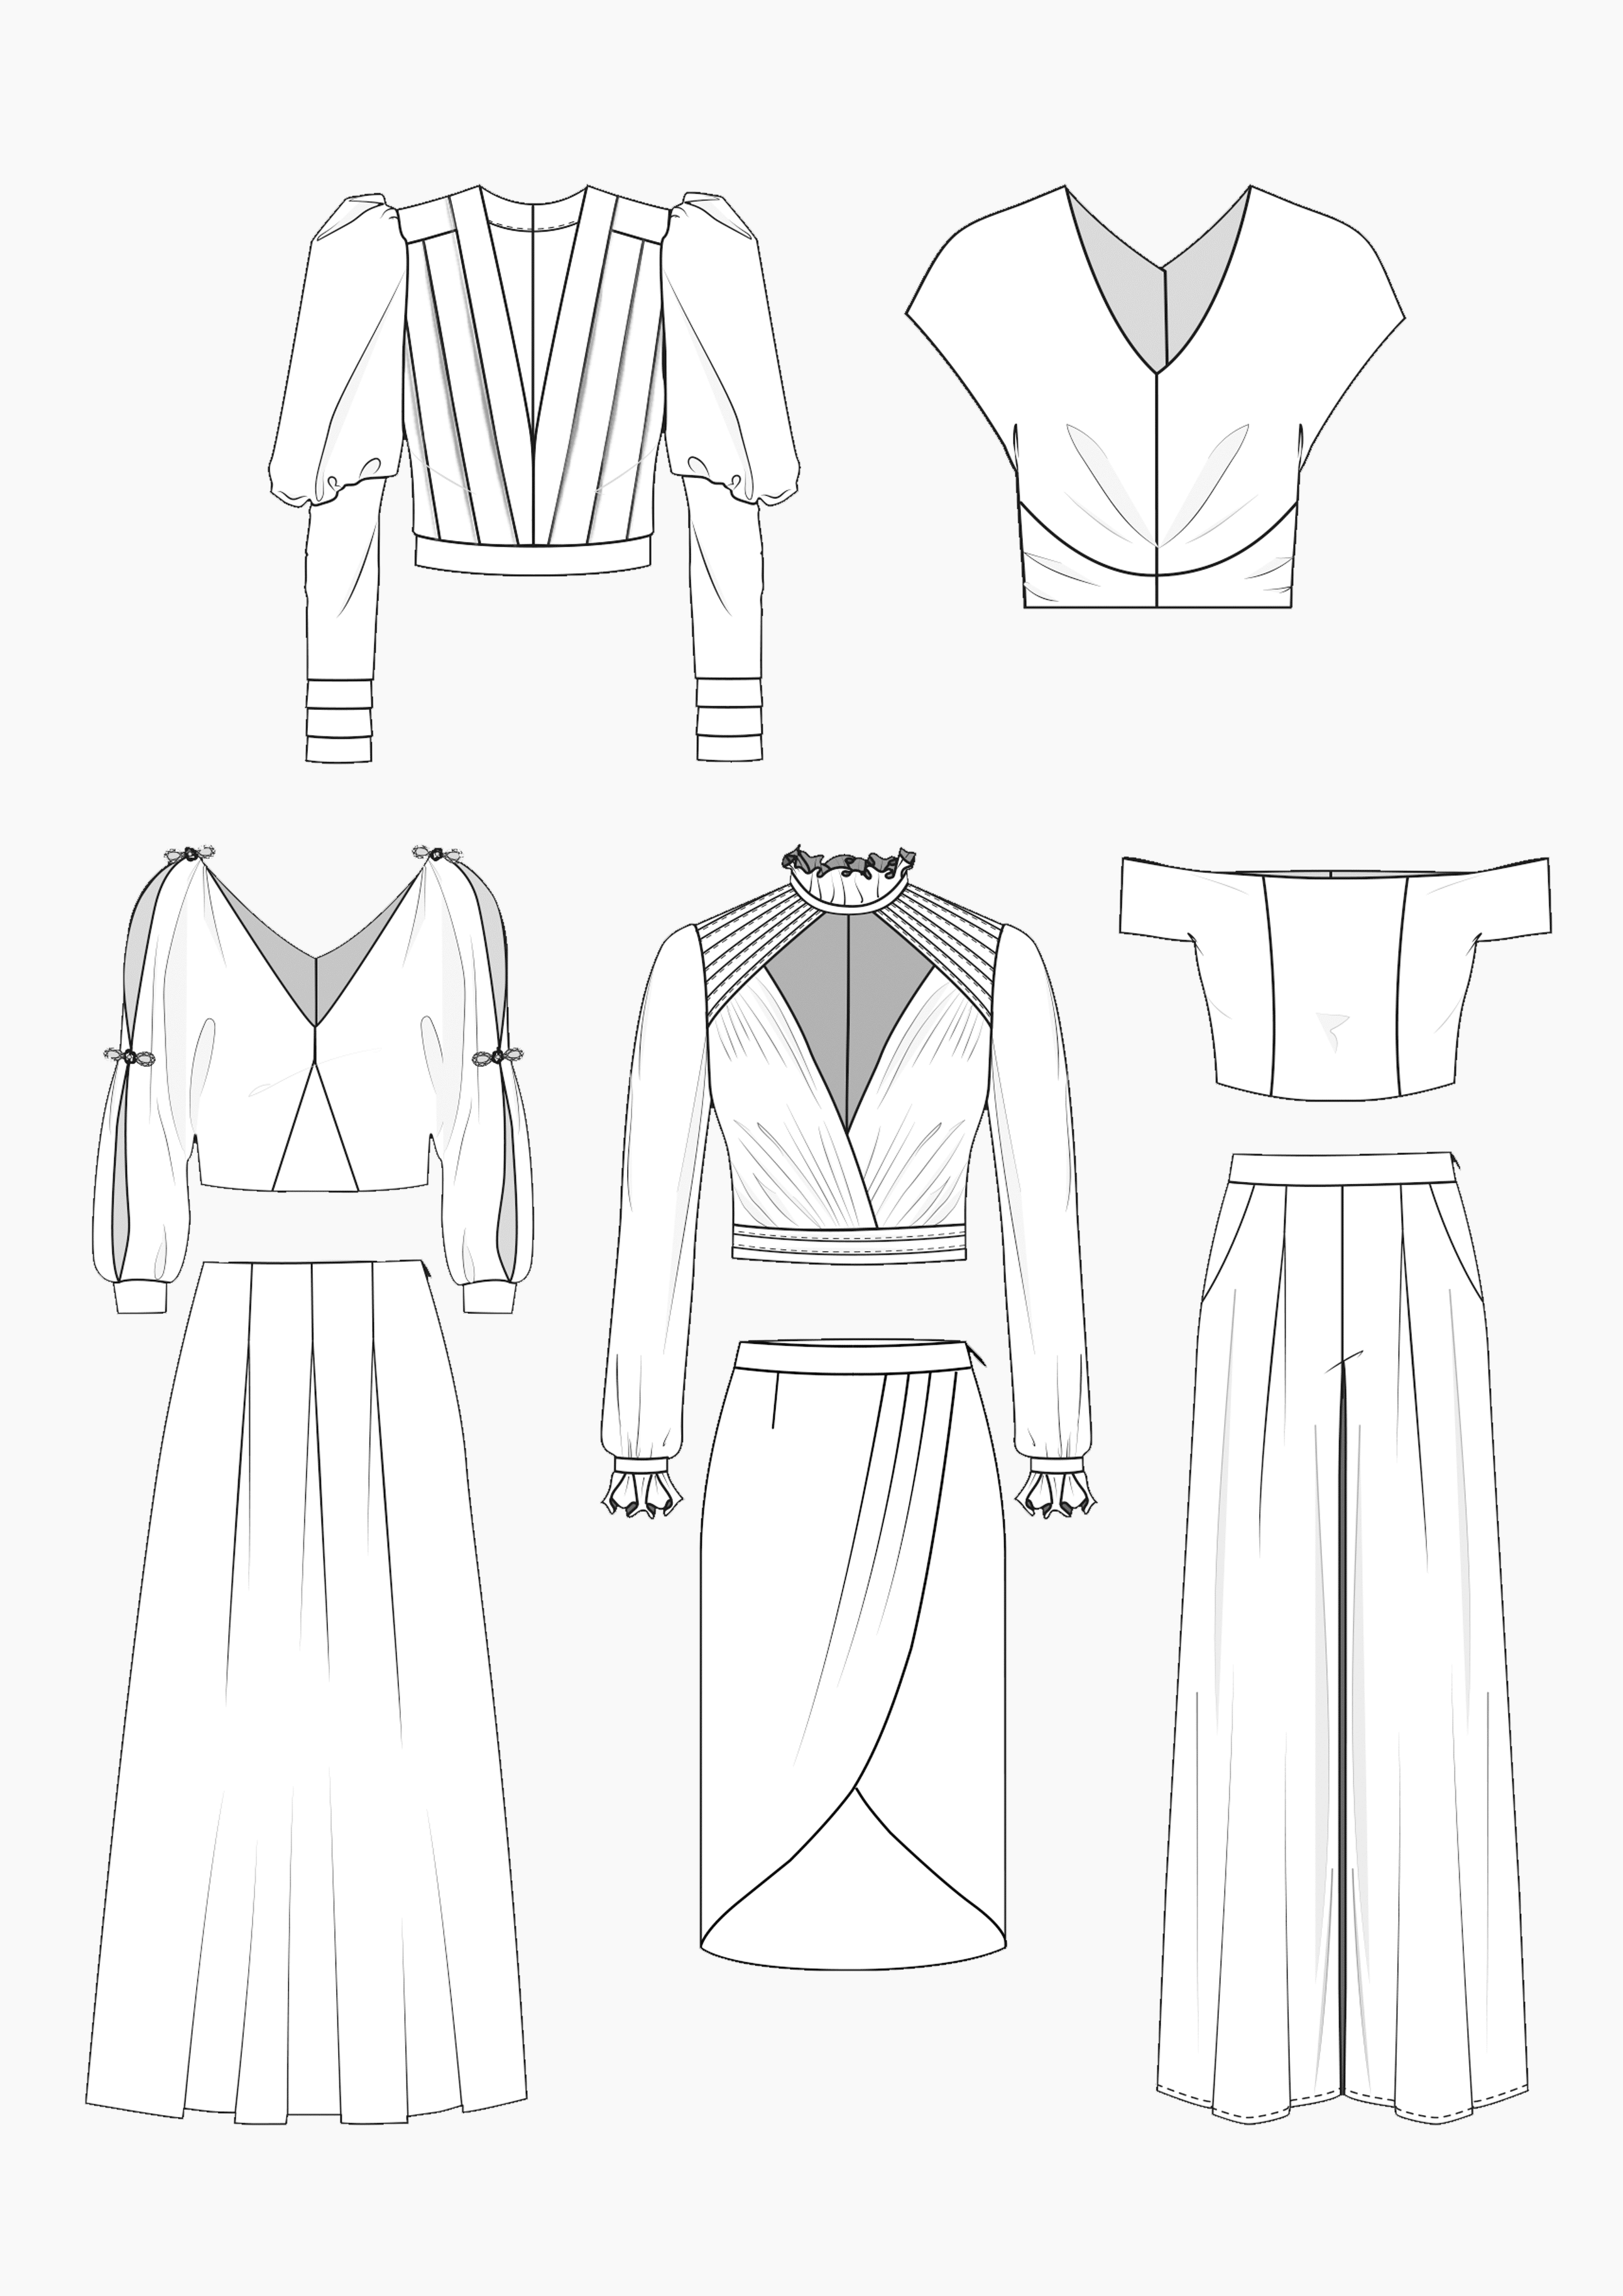 Product: Pattern Making Two-Piece Sets